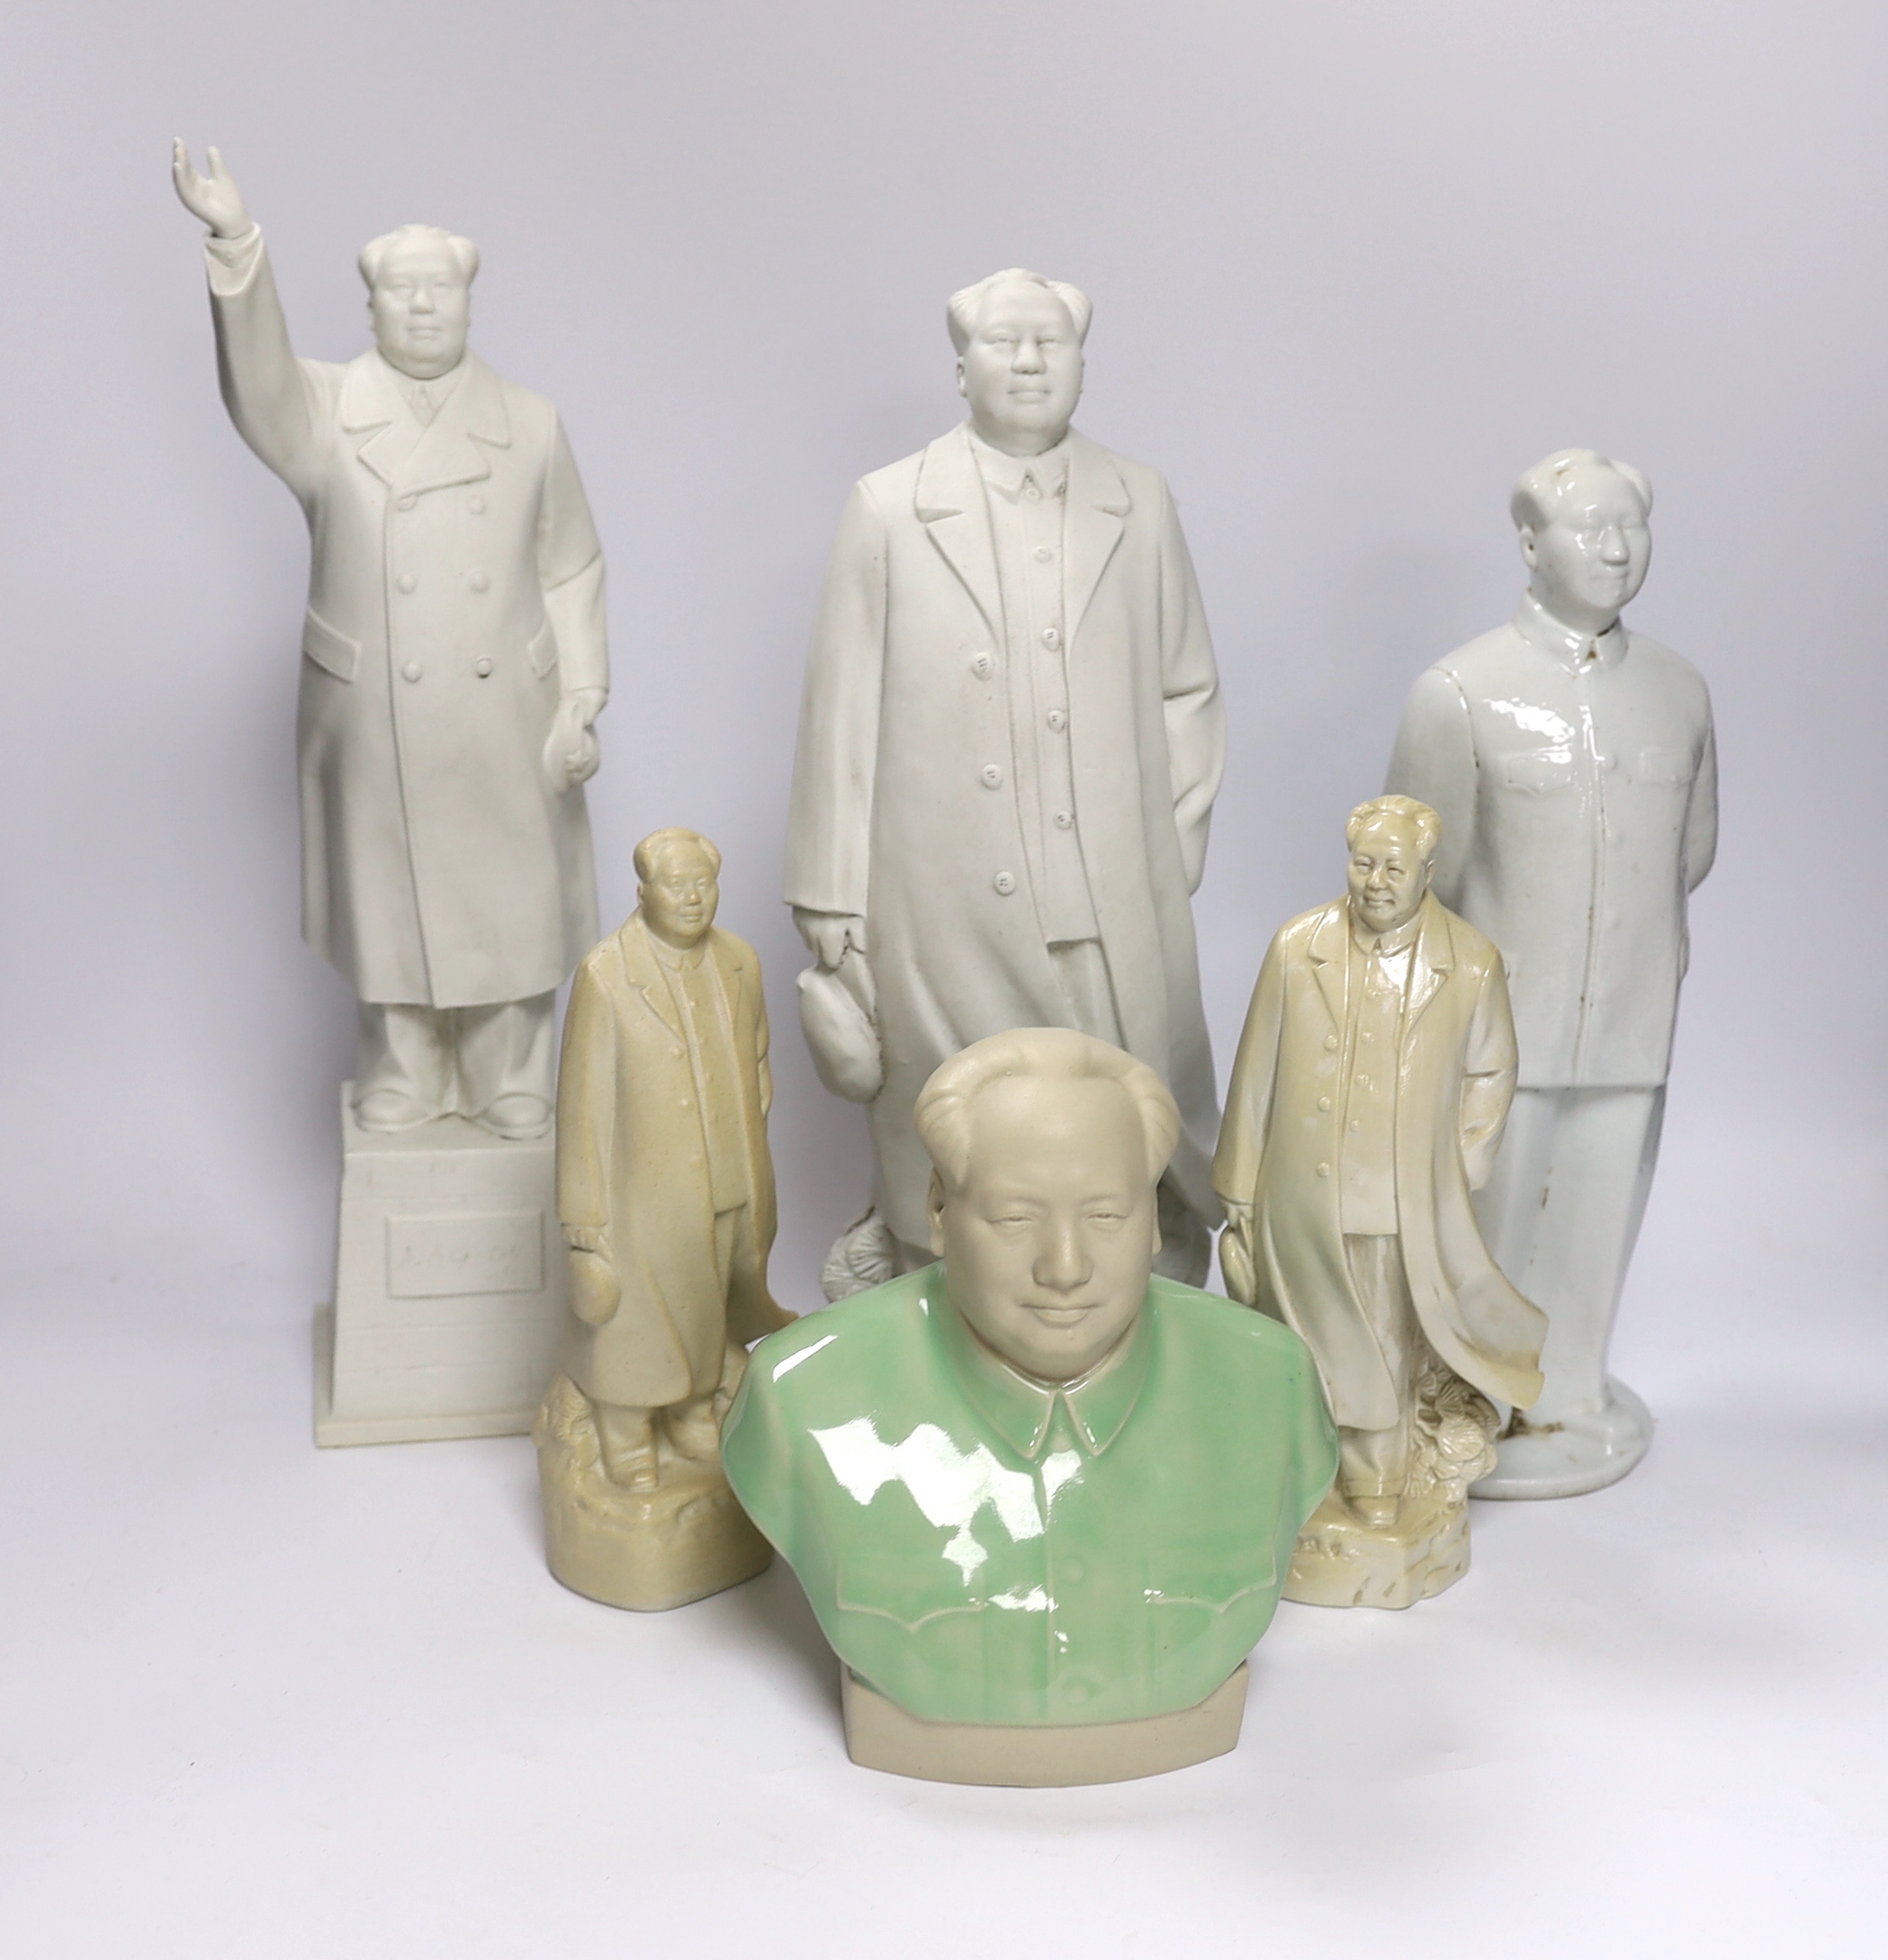 Six 20th century Chinese porcelain figures of Mao Zedong, largest 35cm high